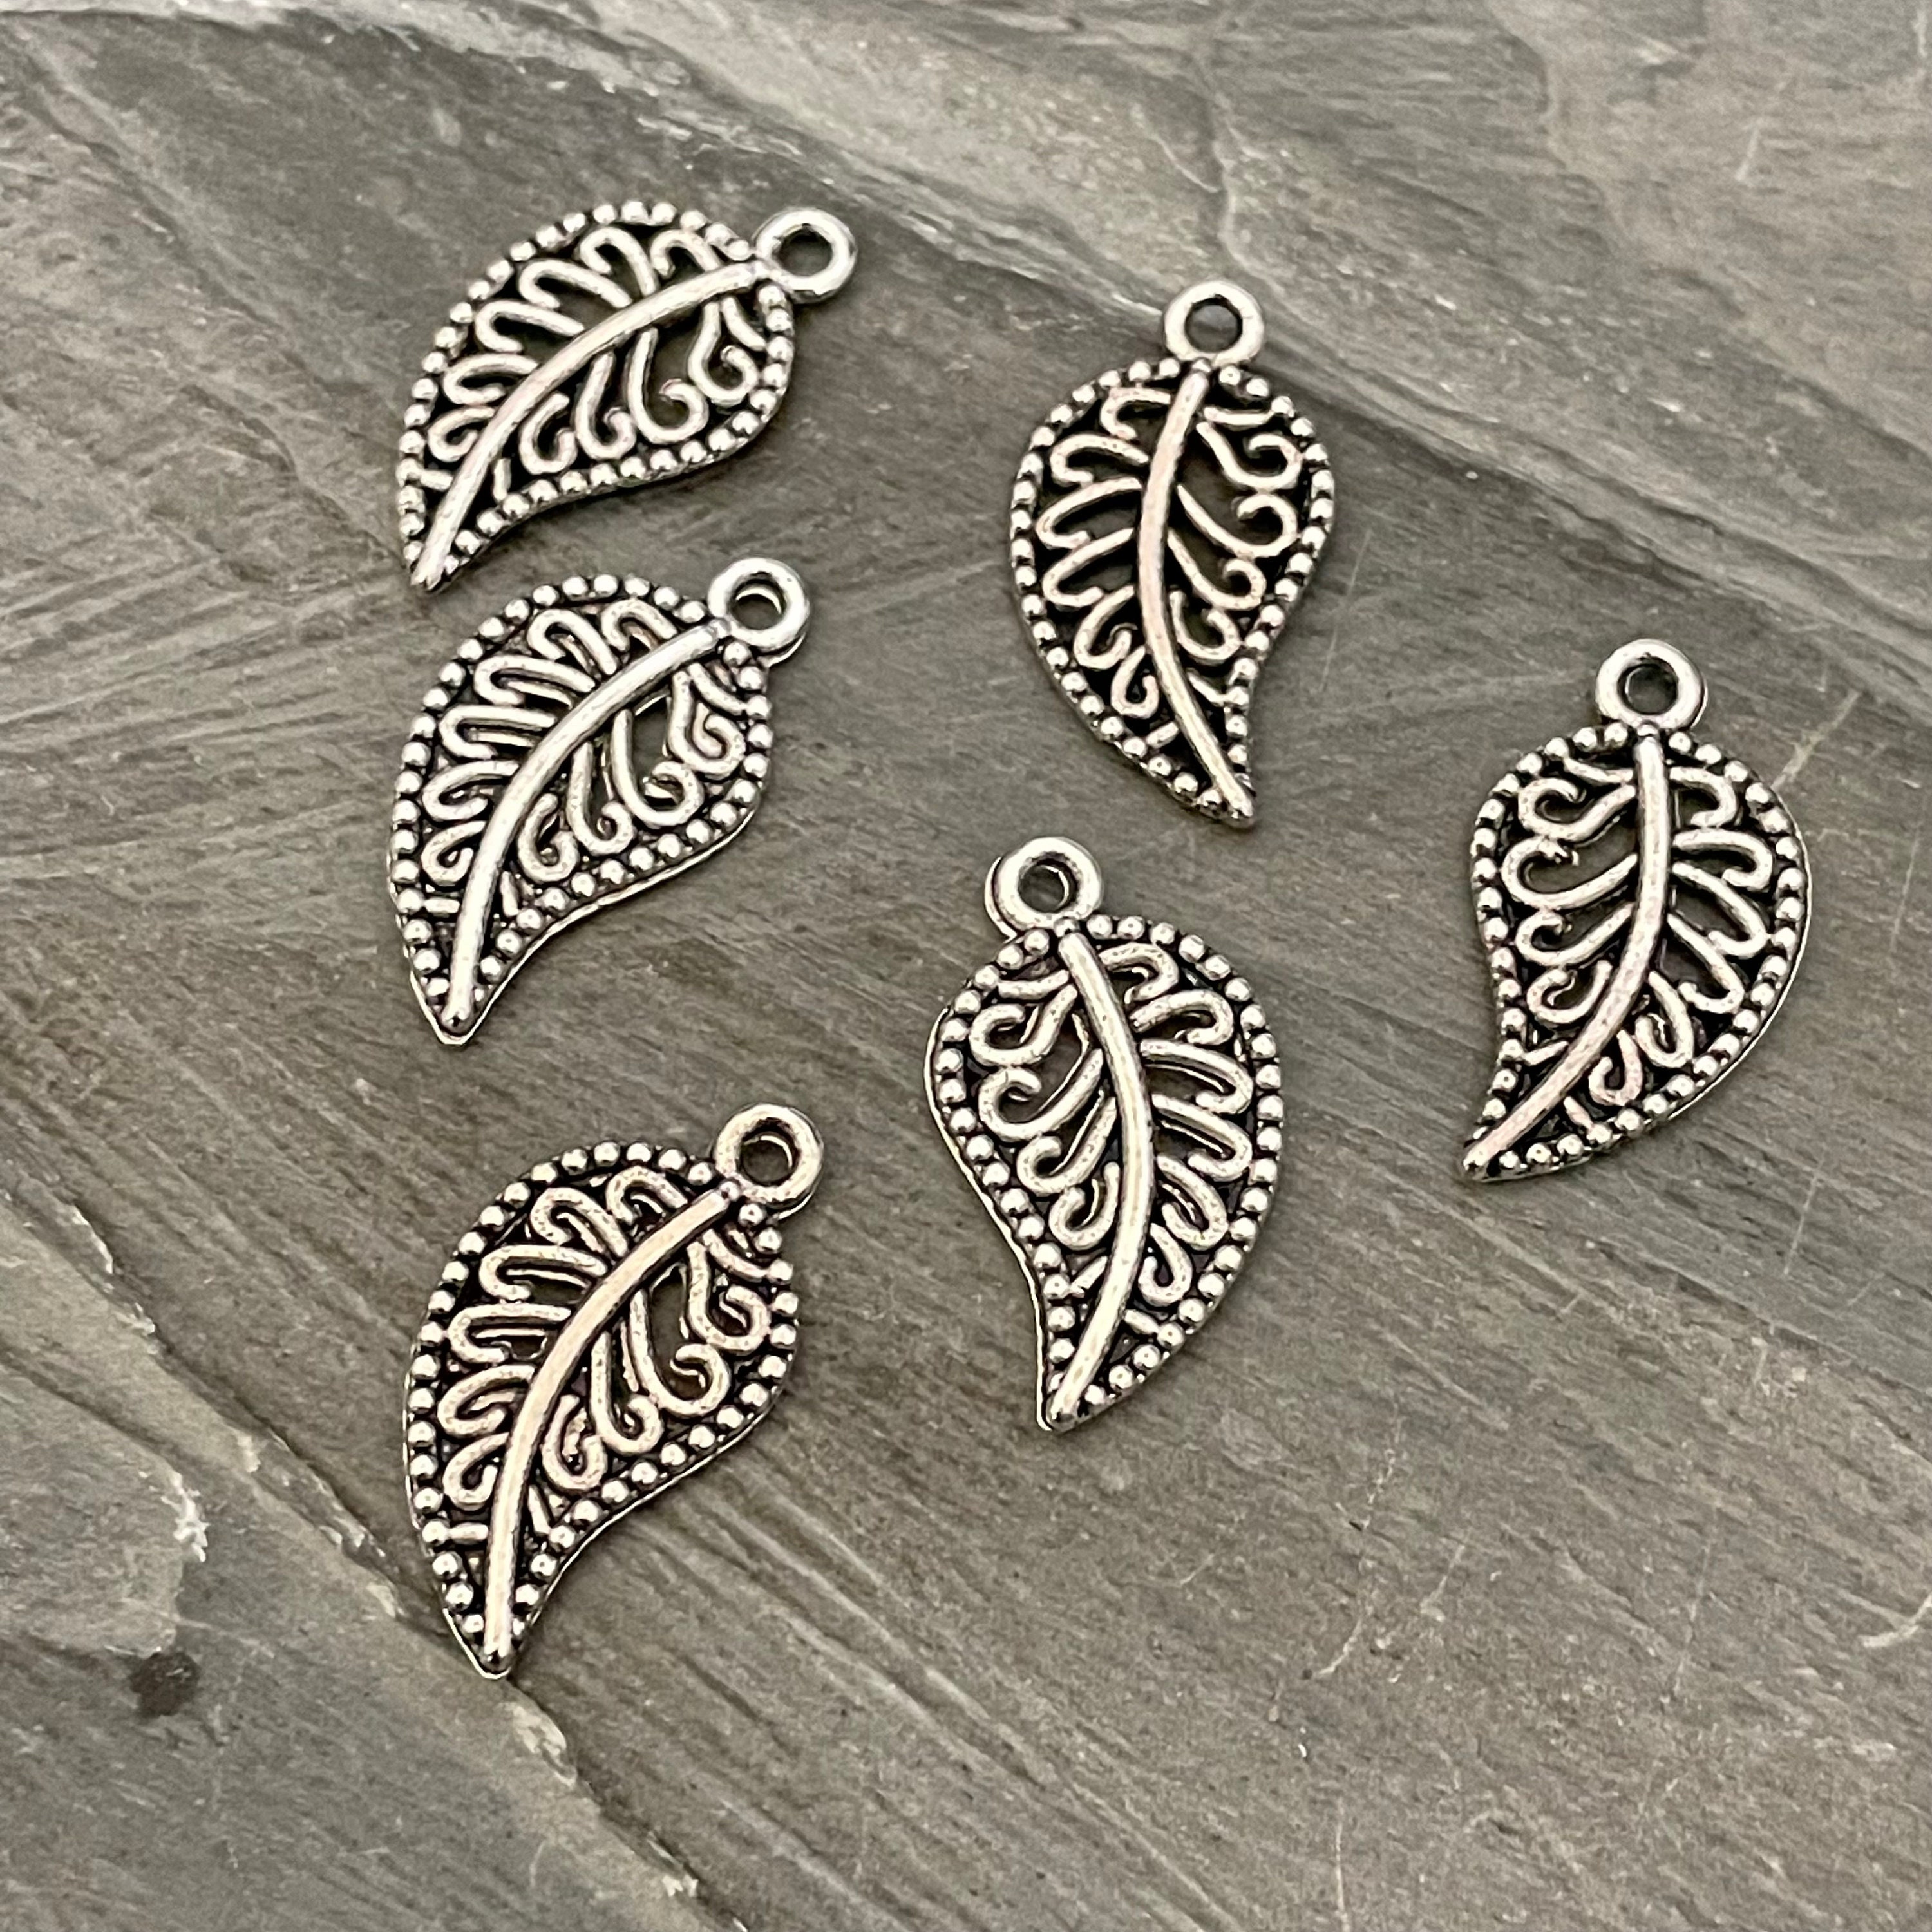 6 Pieces Wholesale Earring Findings for Jewelry Making Parts.best Gift for  Her. 8067 